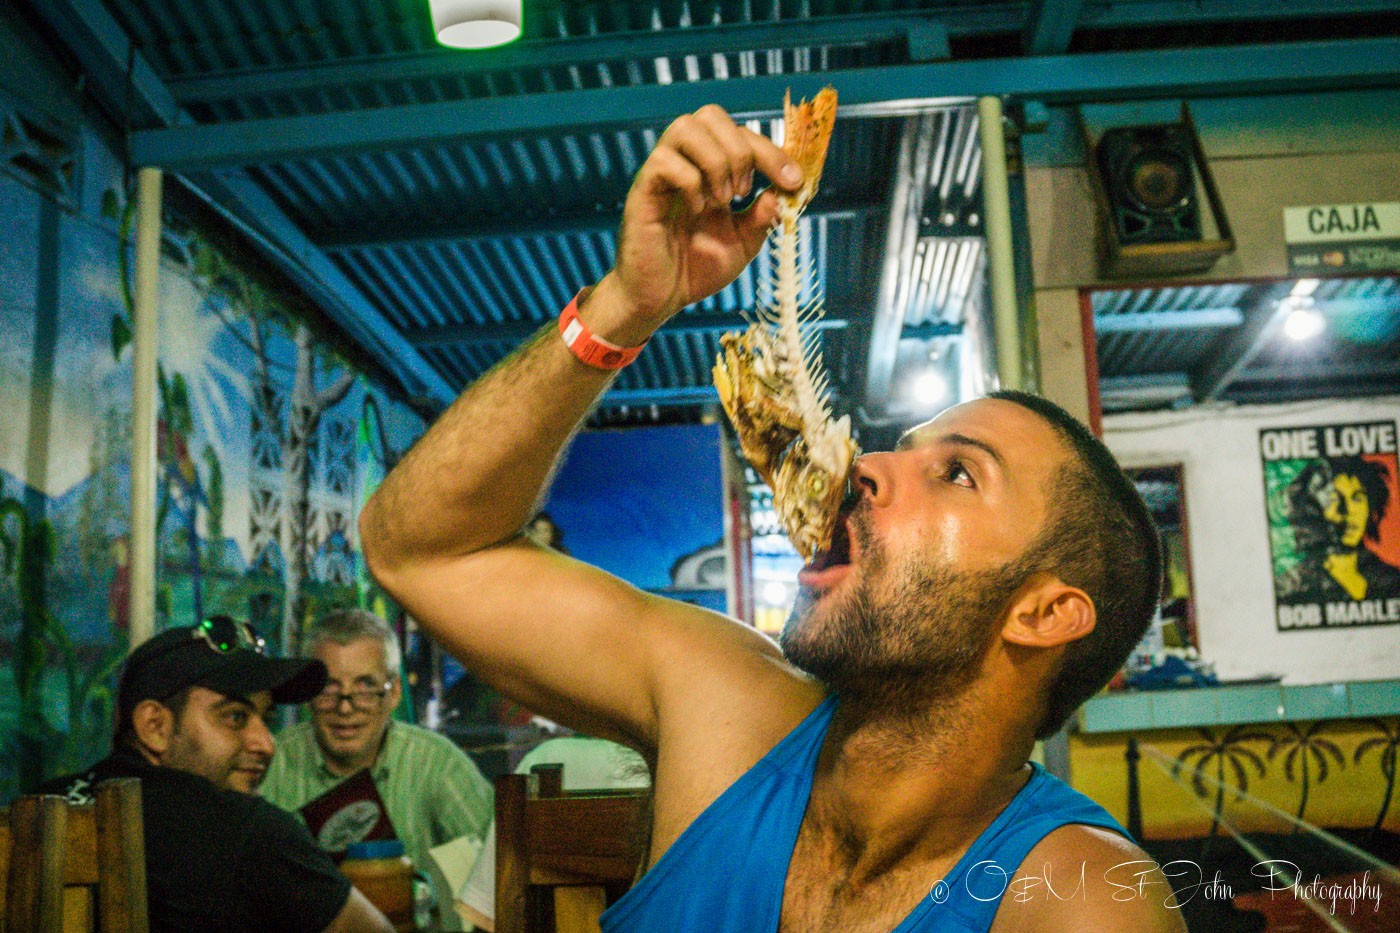 Max enjoying our first meal in Nicaragua...perhaps a little too much